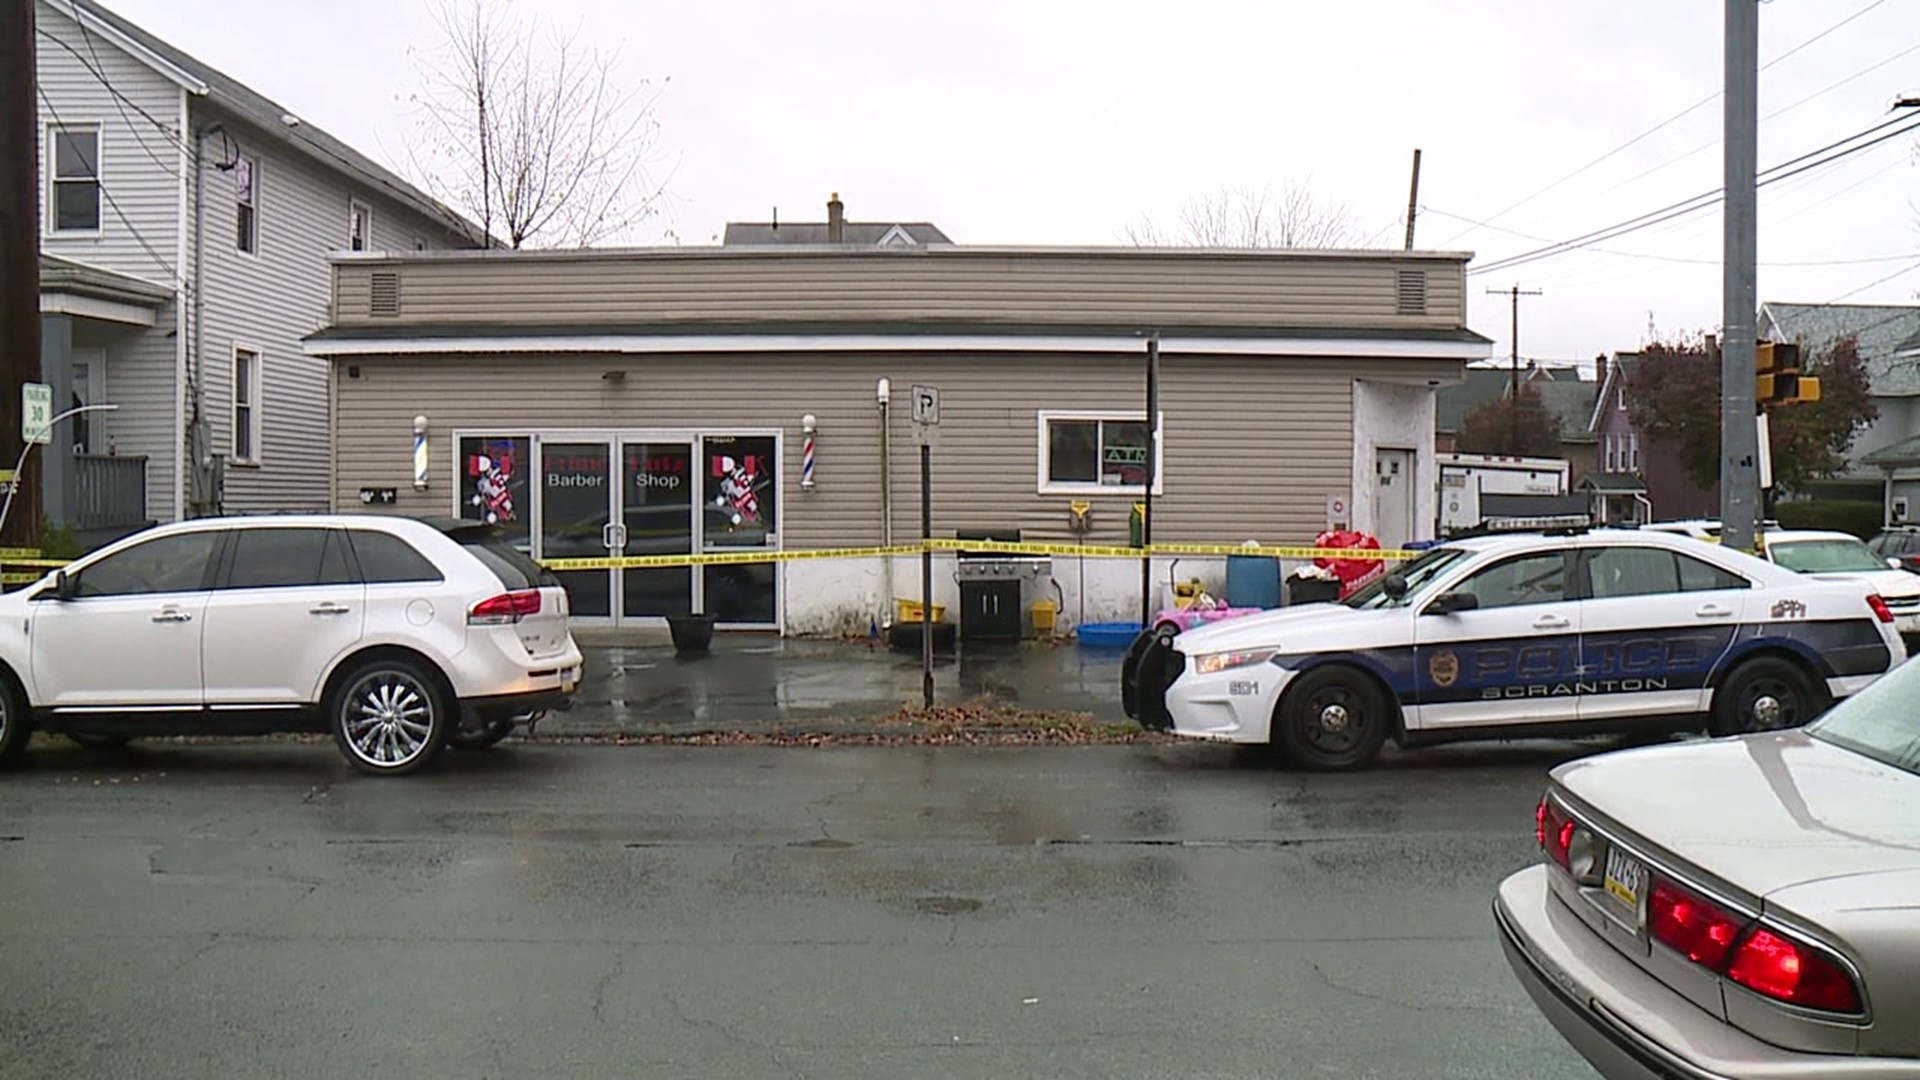 Police raided Pop's Tires and Primekutz Barber Shop around 1 p.m. Friday afternoon in the city's Pine Brook section.